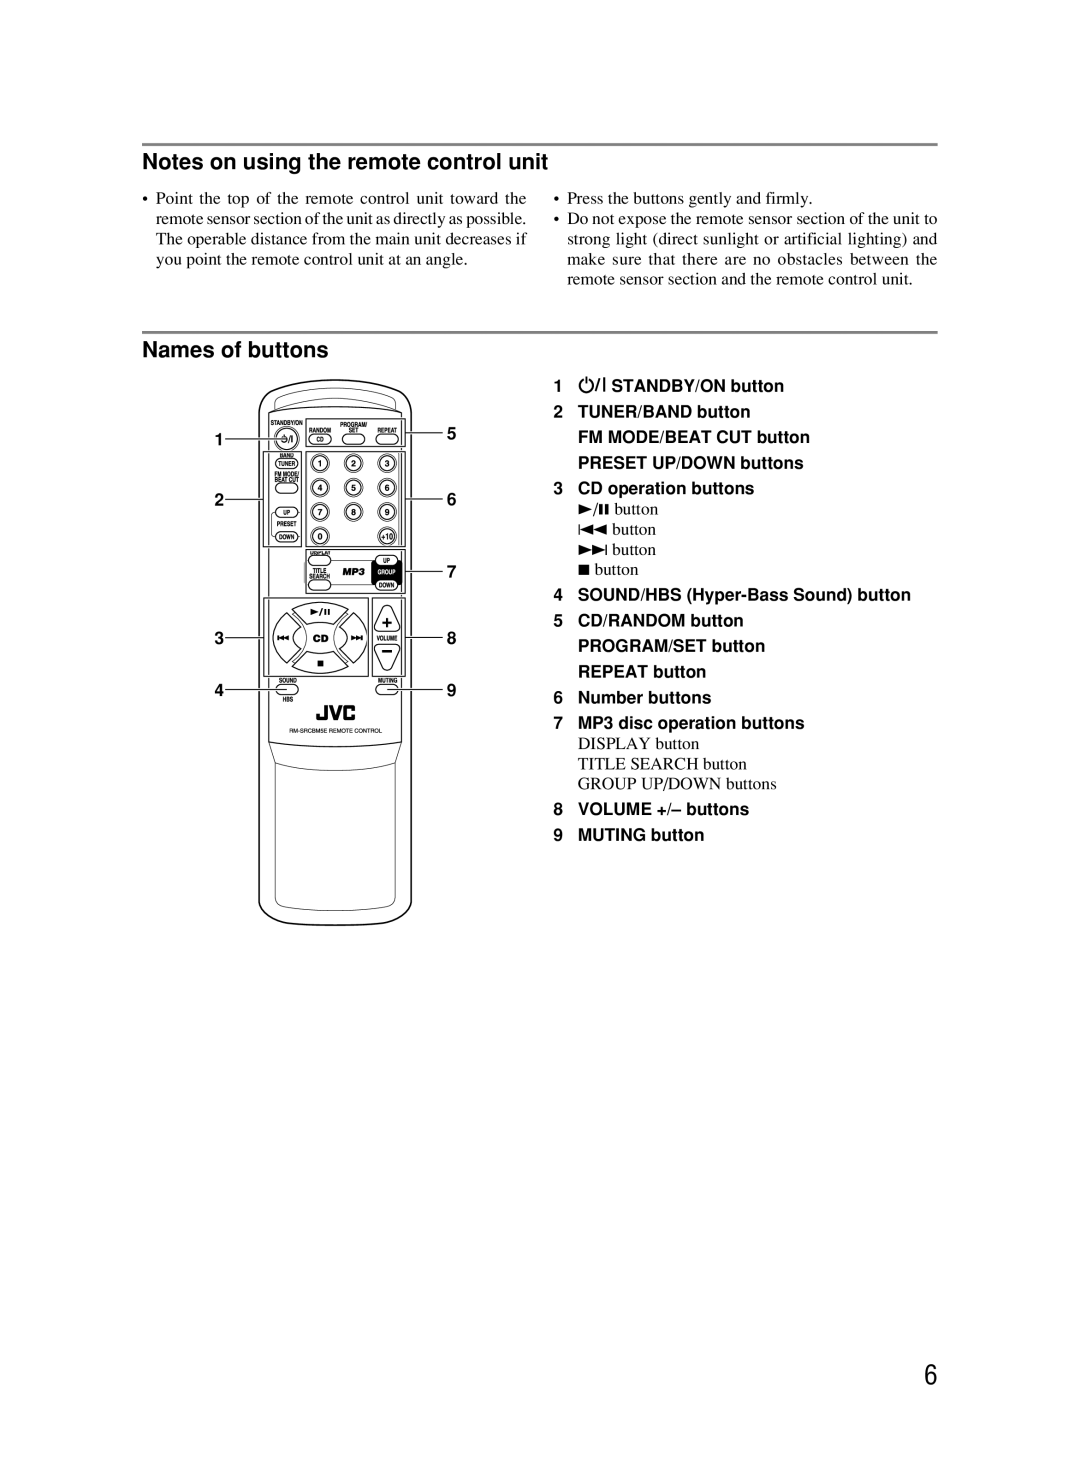 JVC RC-BM5 manual Notes on using the remote control unit, Names of buttons 